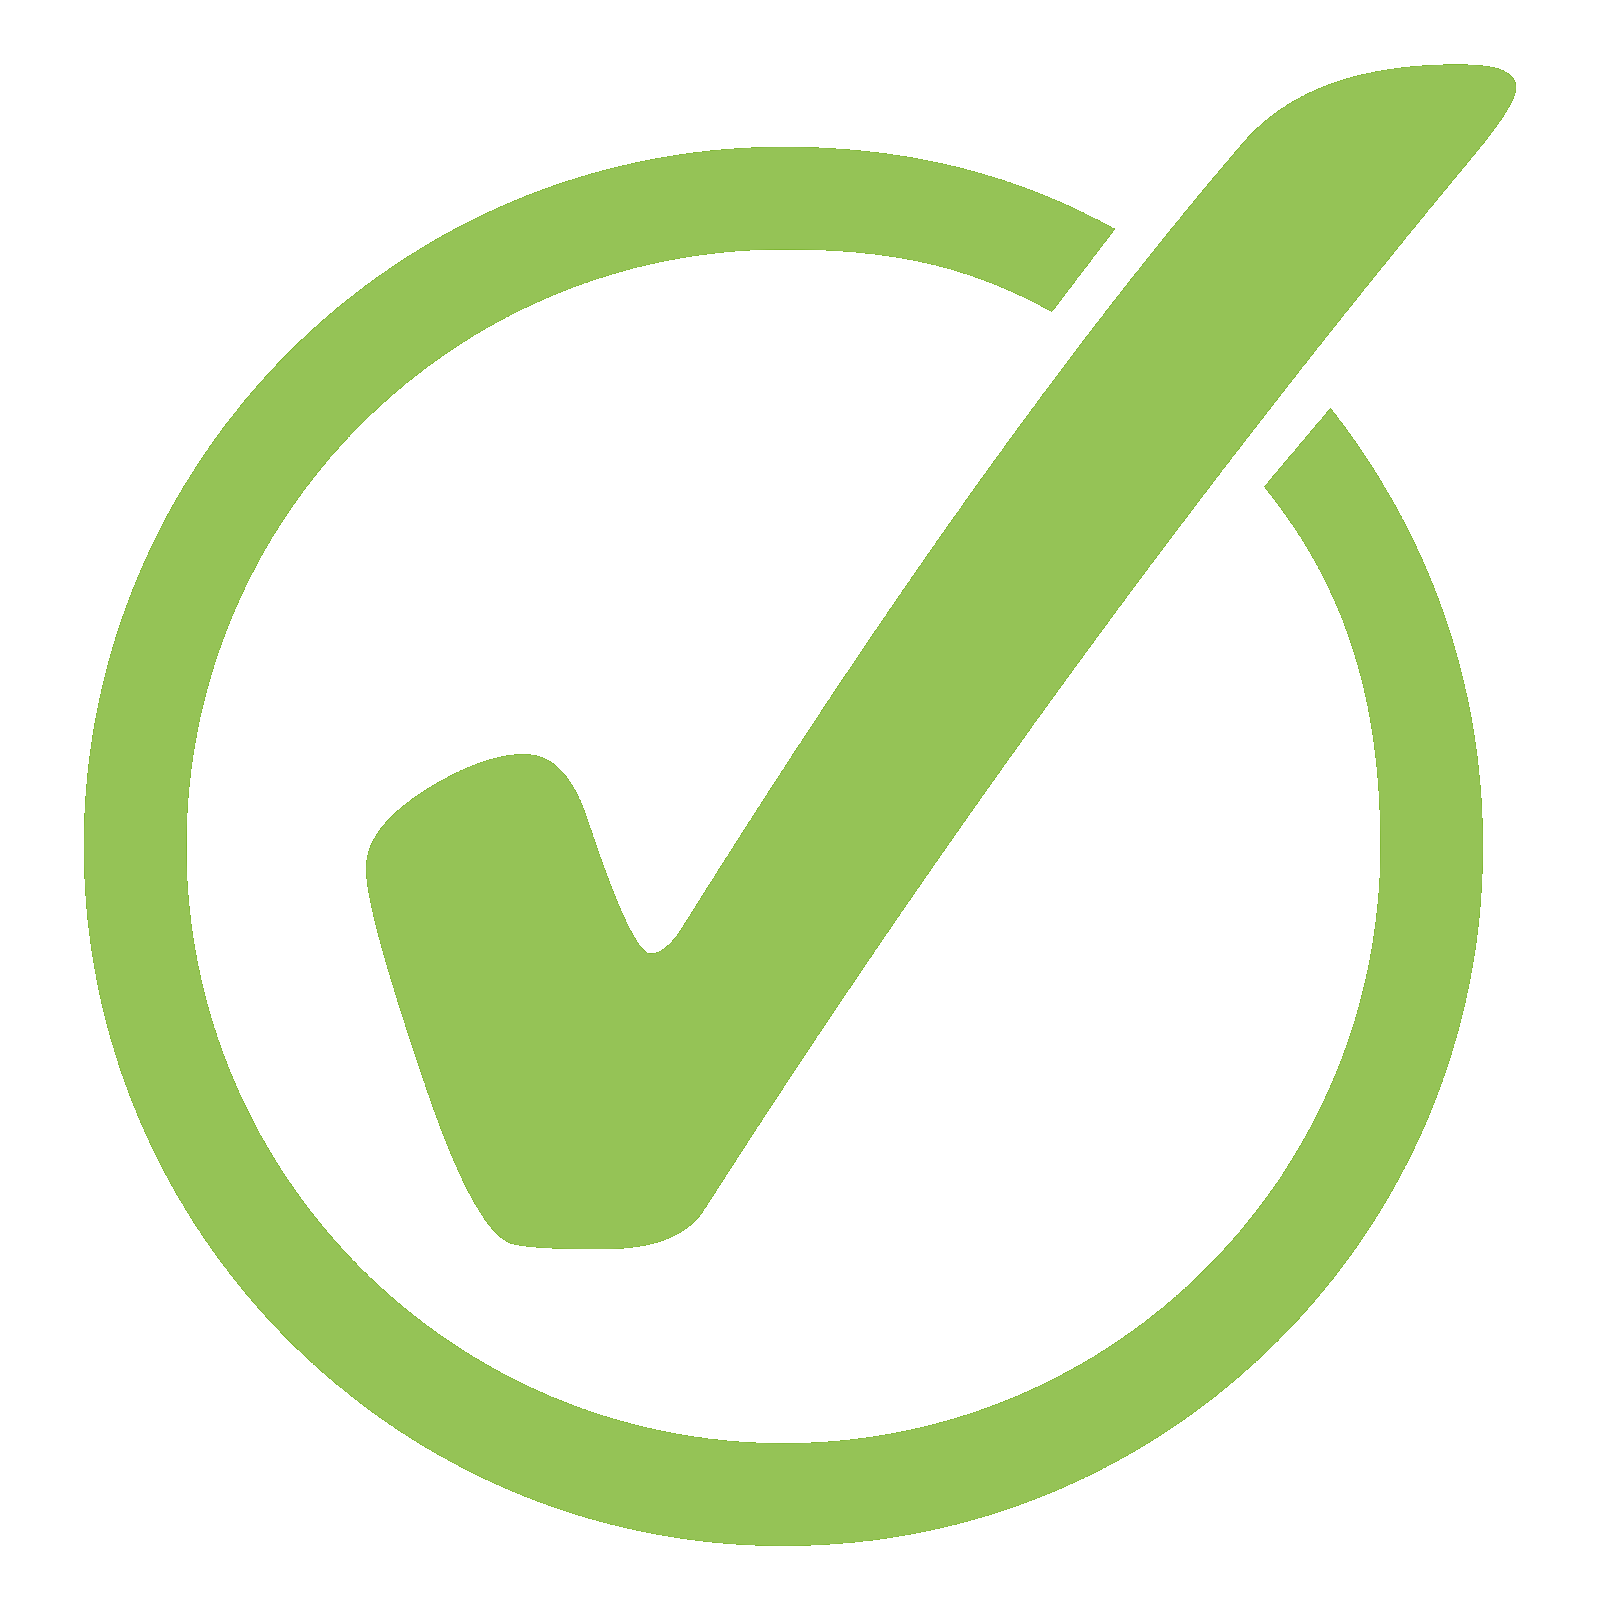 Green Tick Vector PNG Free Image